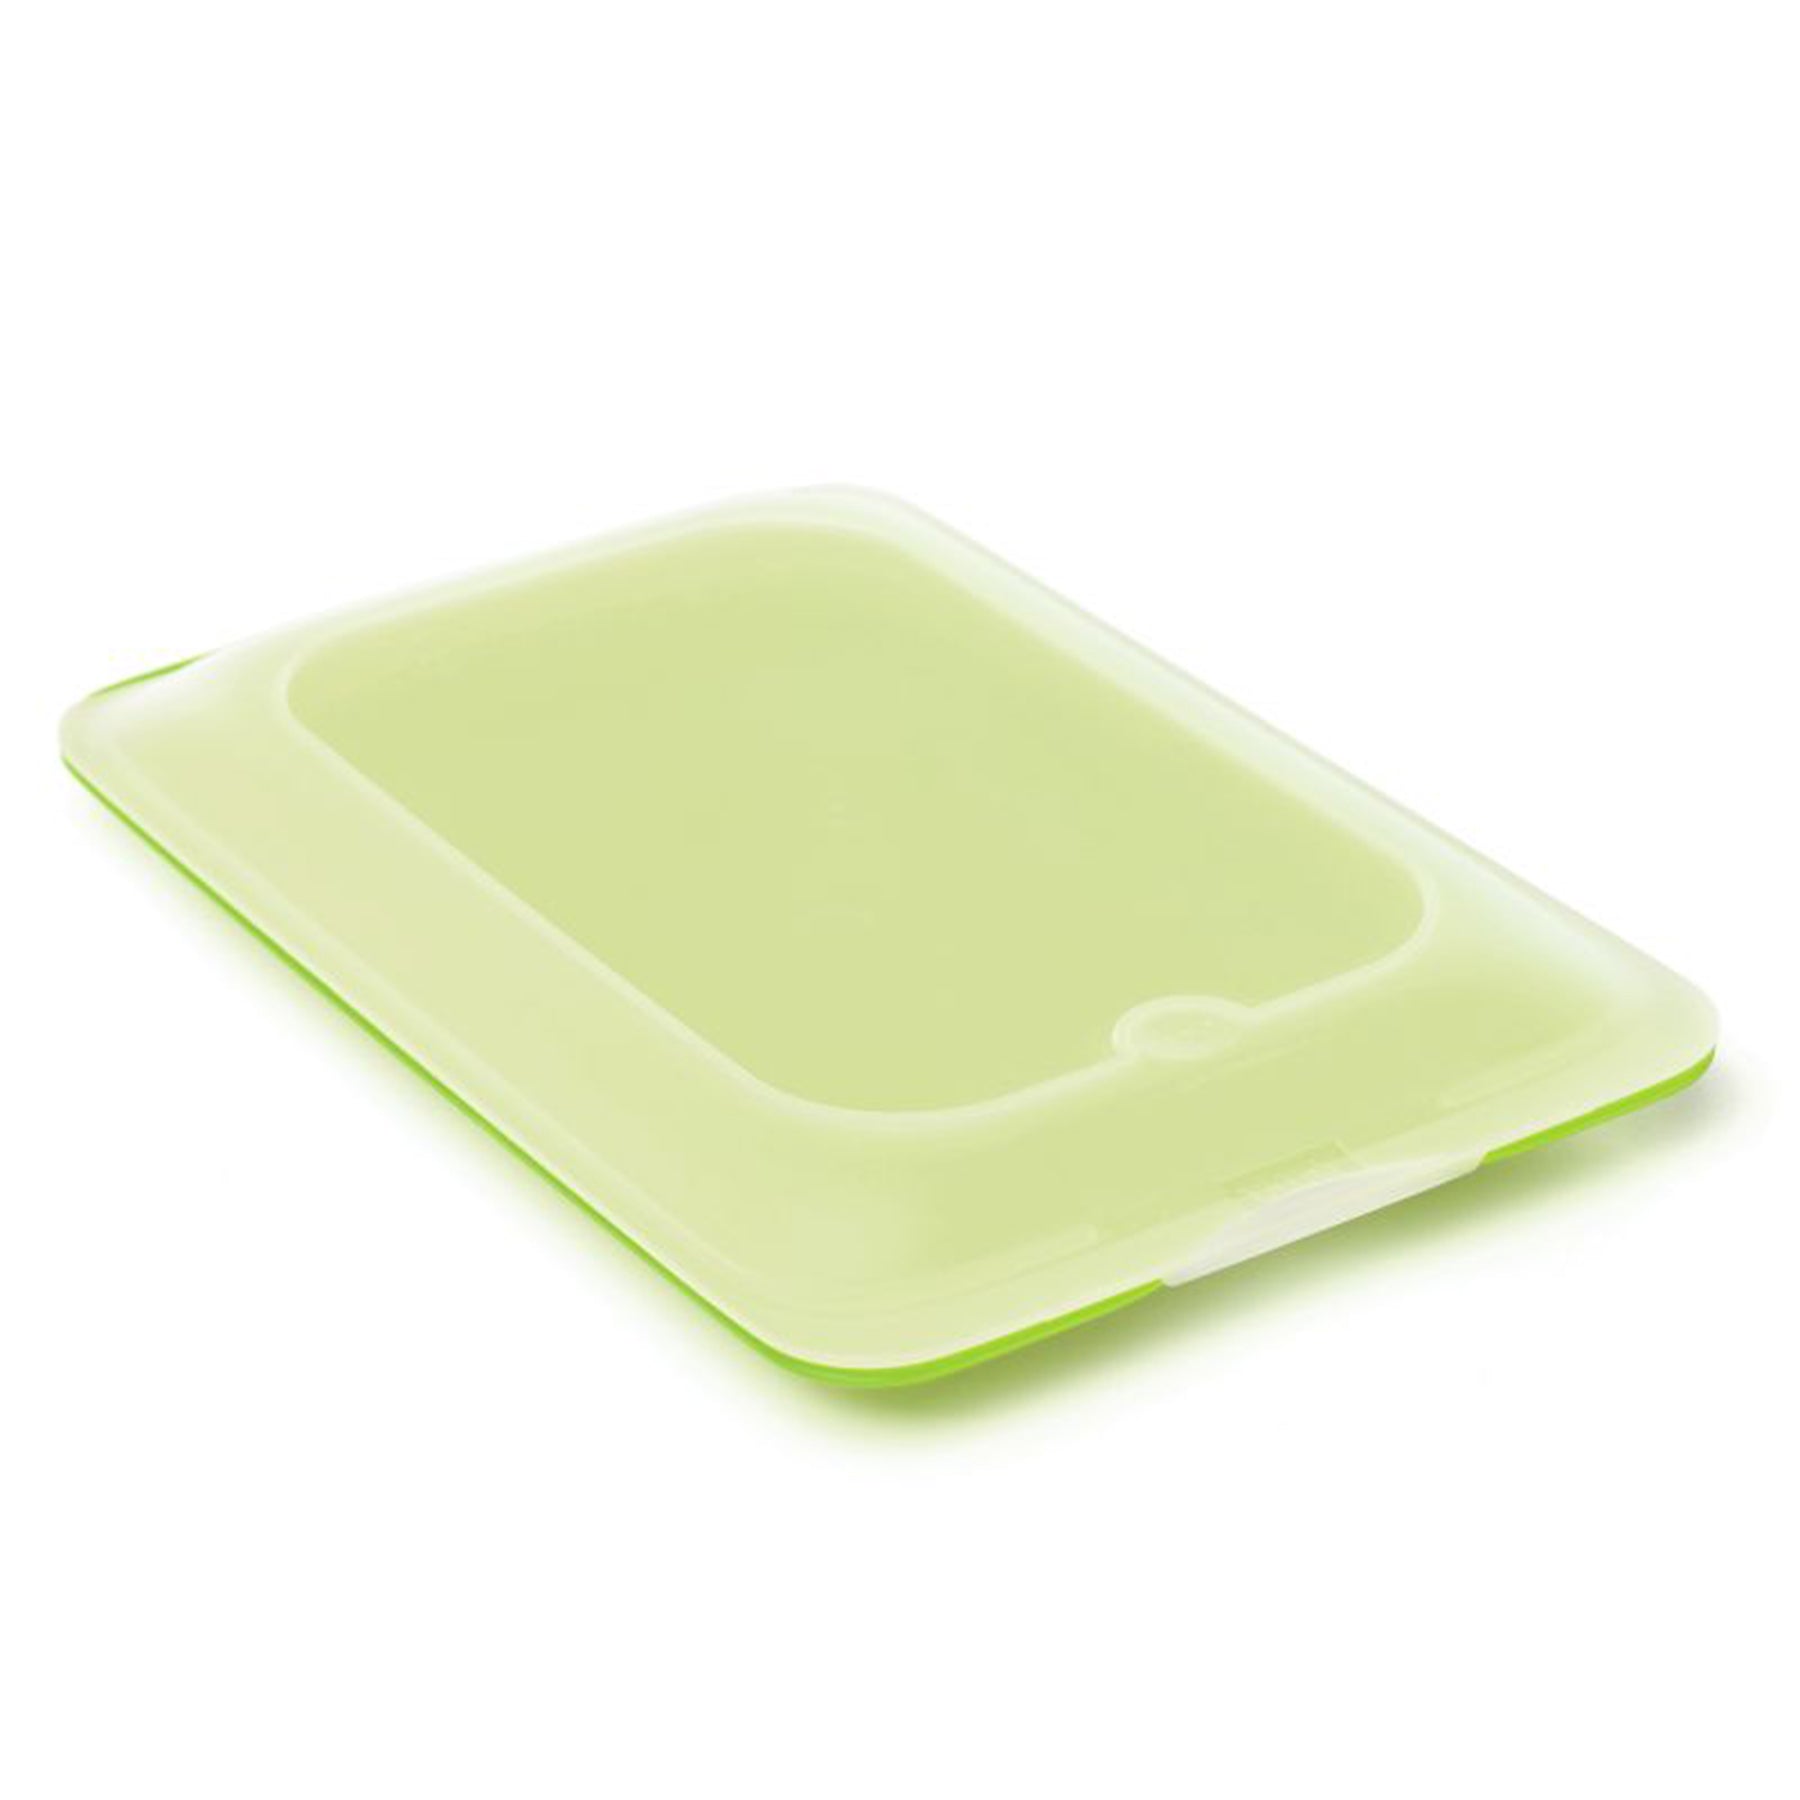 COLD CUTS CONTAINER - FRESH SRP 12 - MIX COLOUR